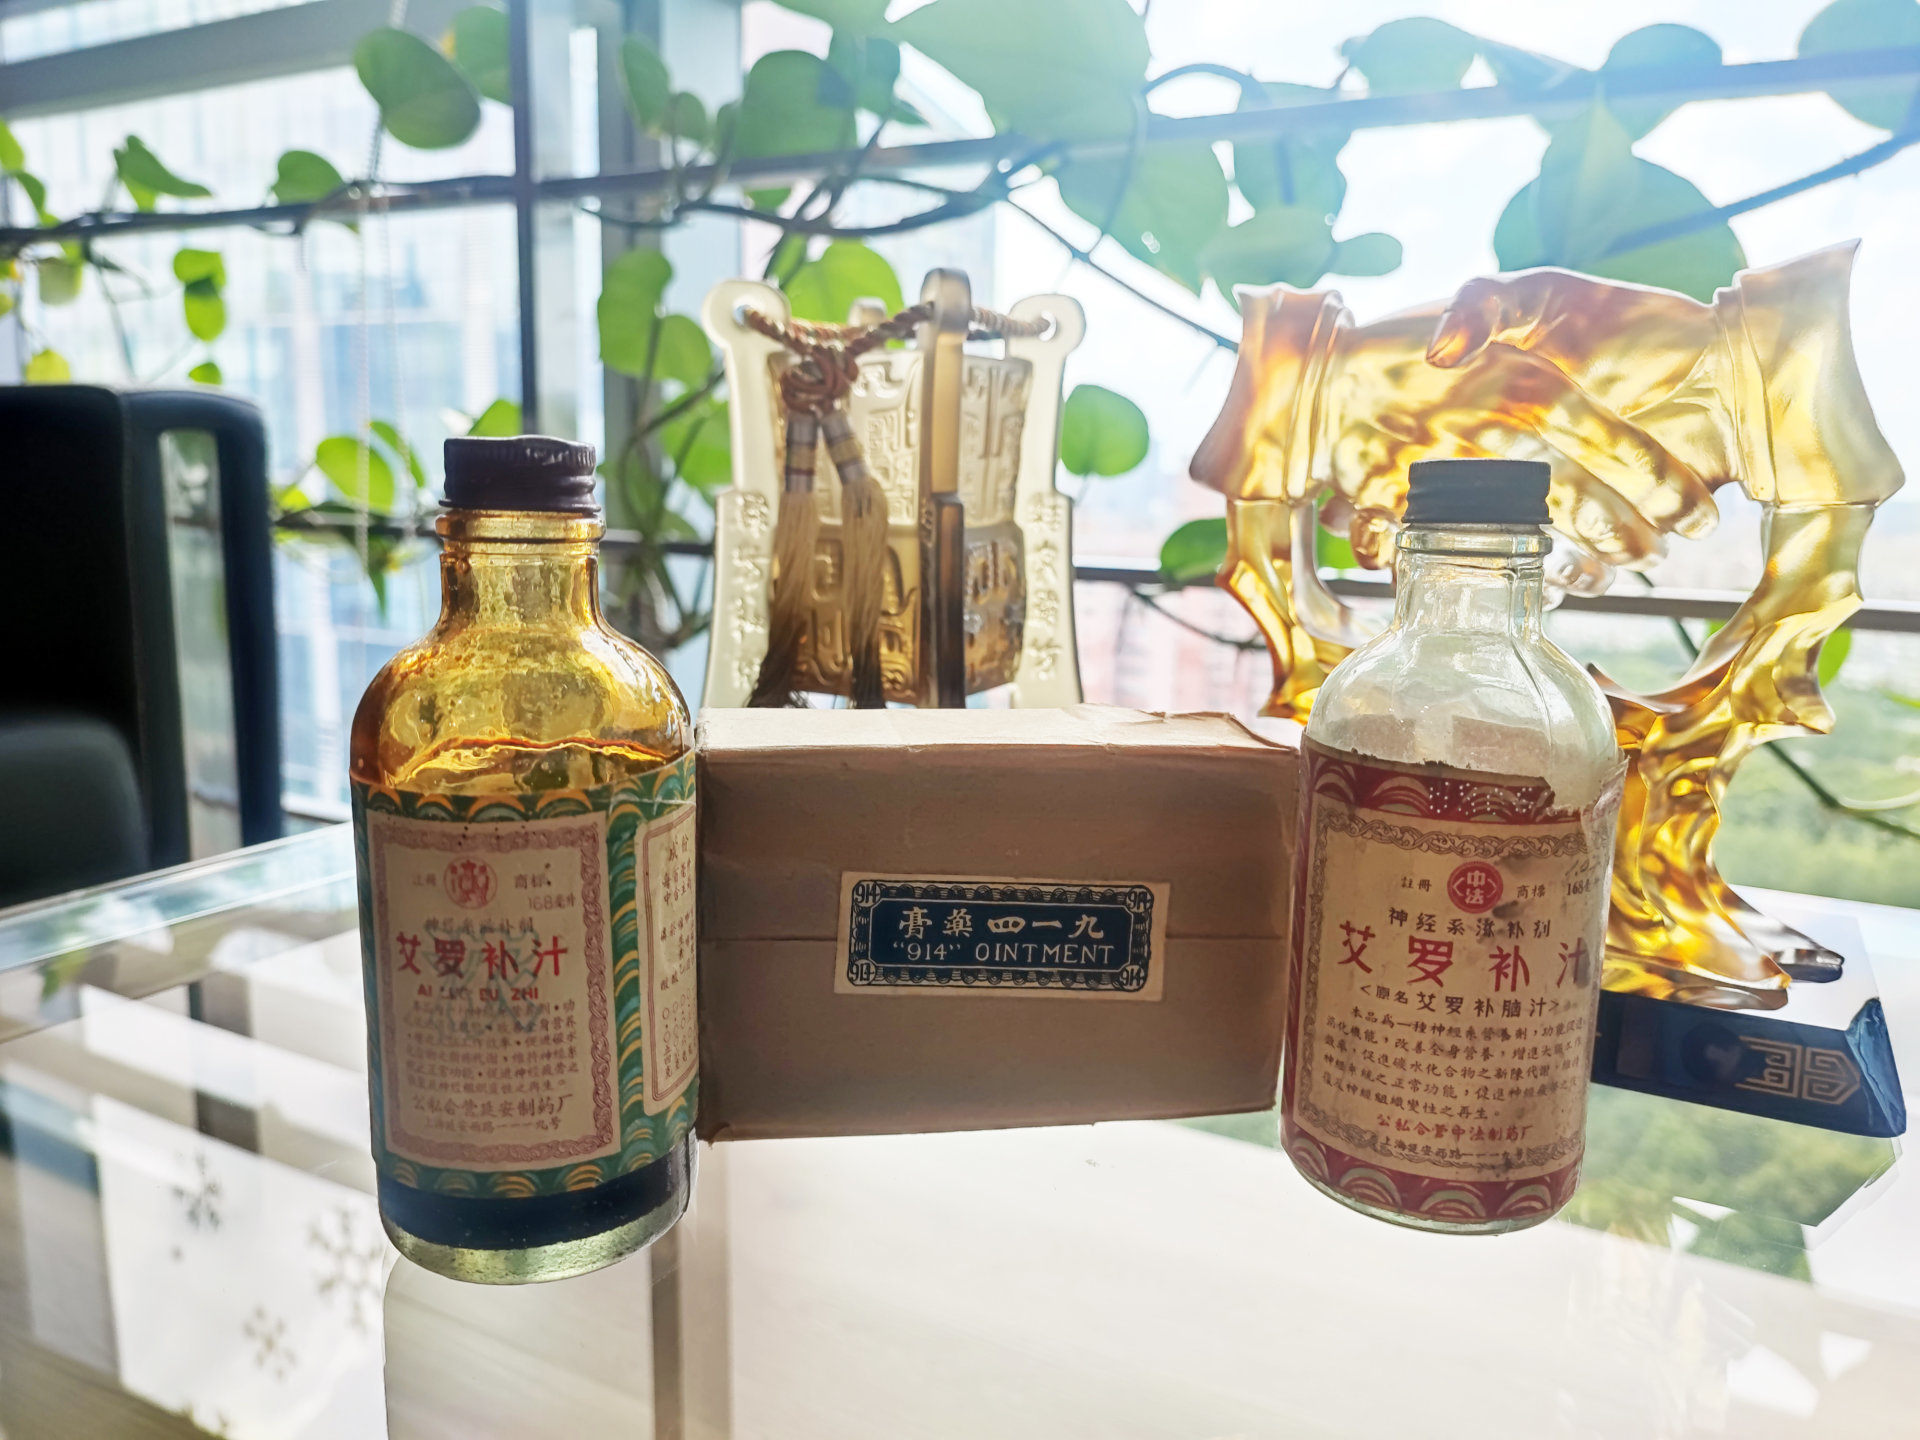 Thanks to Henan collector Mr. Huang Wenhong for donating the historical collection of Sino-French Pharmacy to Shanghai Yan'an Pharmaceutical